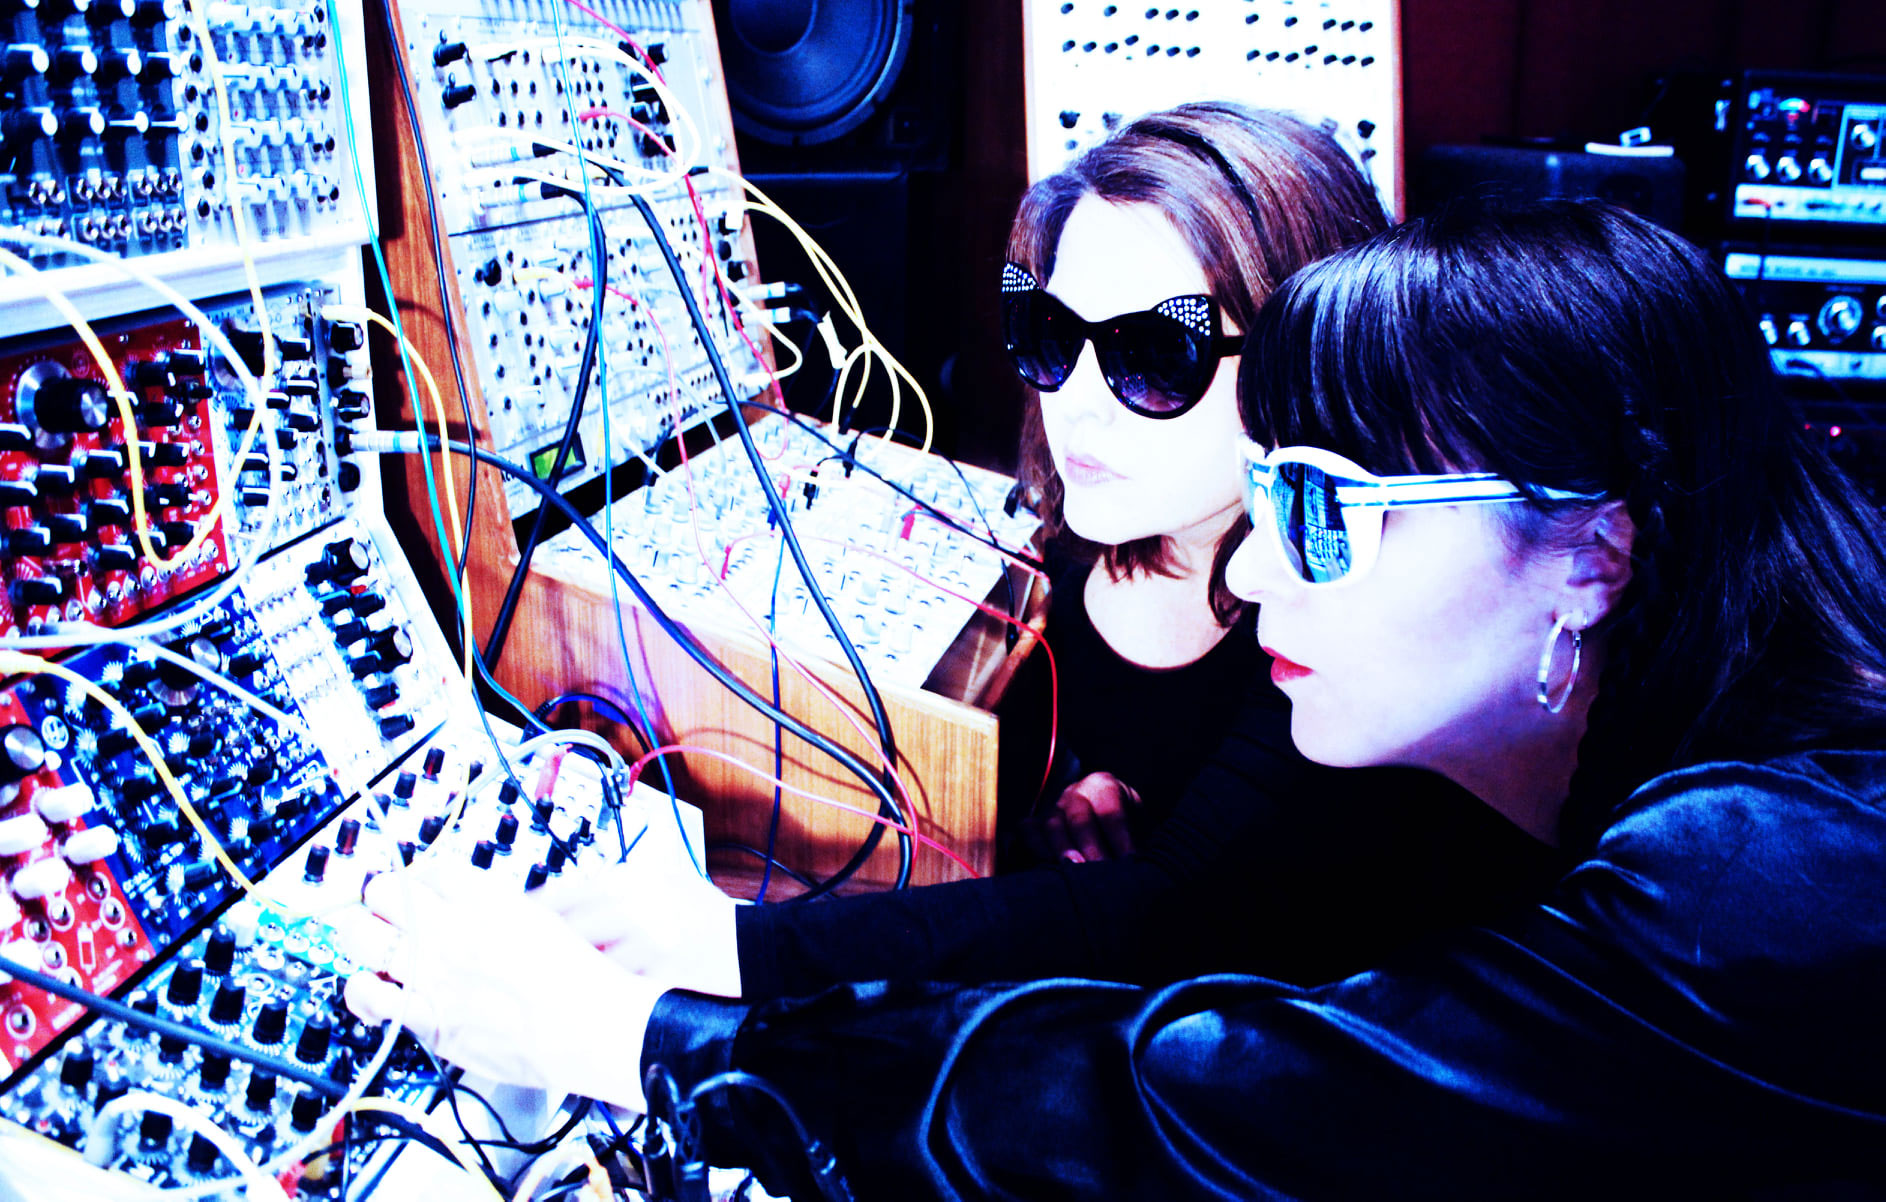 Almost Honey Intensely working with synths